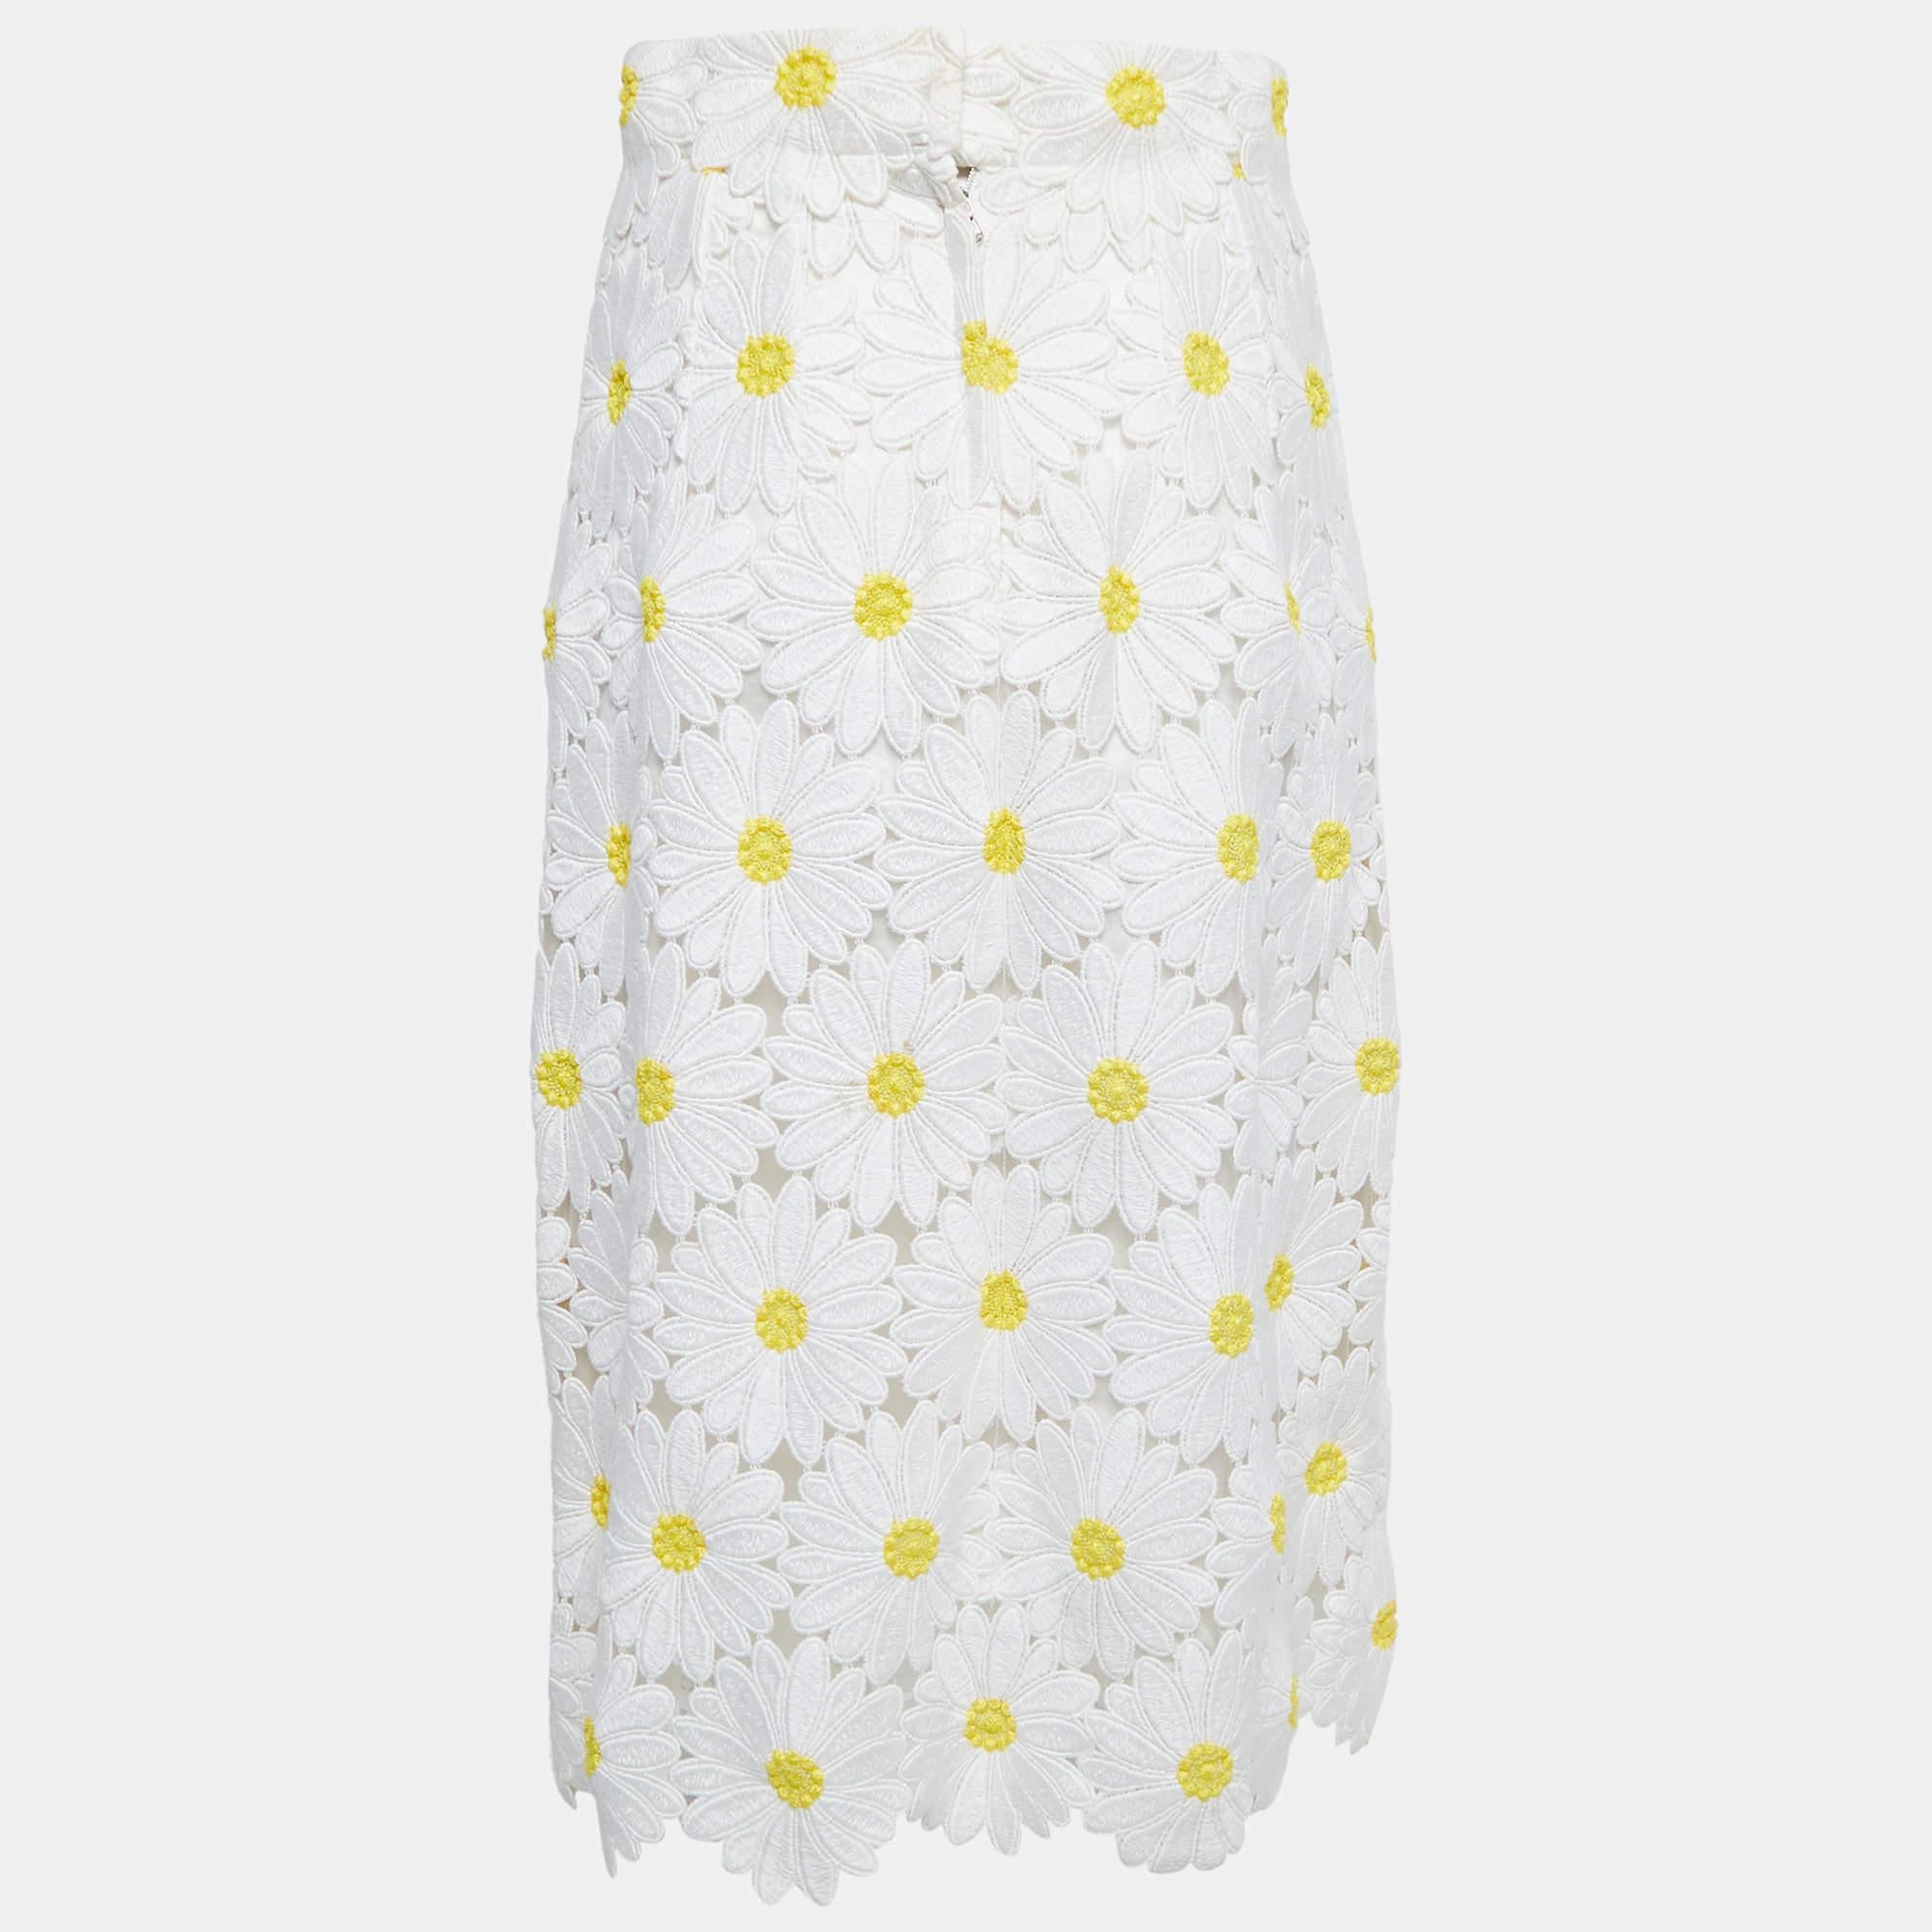 This midi skirt from the House of Dolce & Gabbana is a beautiful creation that will add grace to your ensemble. It is fashioned in white Guipure lace fabric, which is augmented with sunflower appliques. It is equipped with zipper closure. Match this